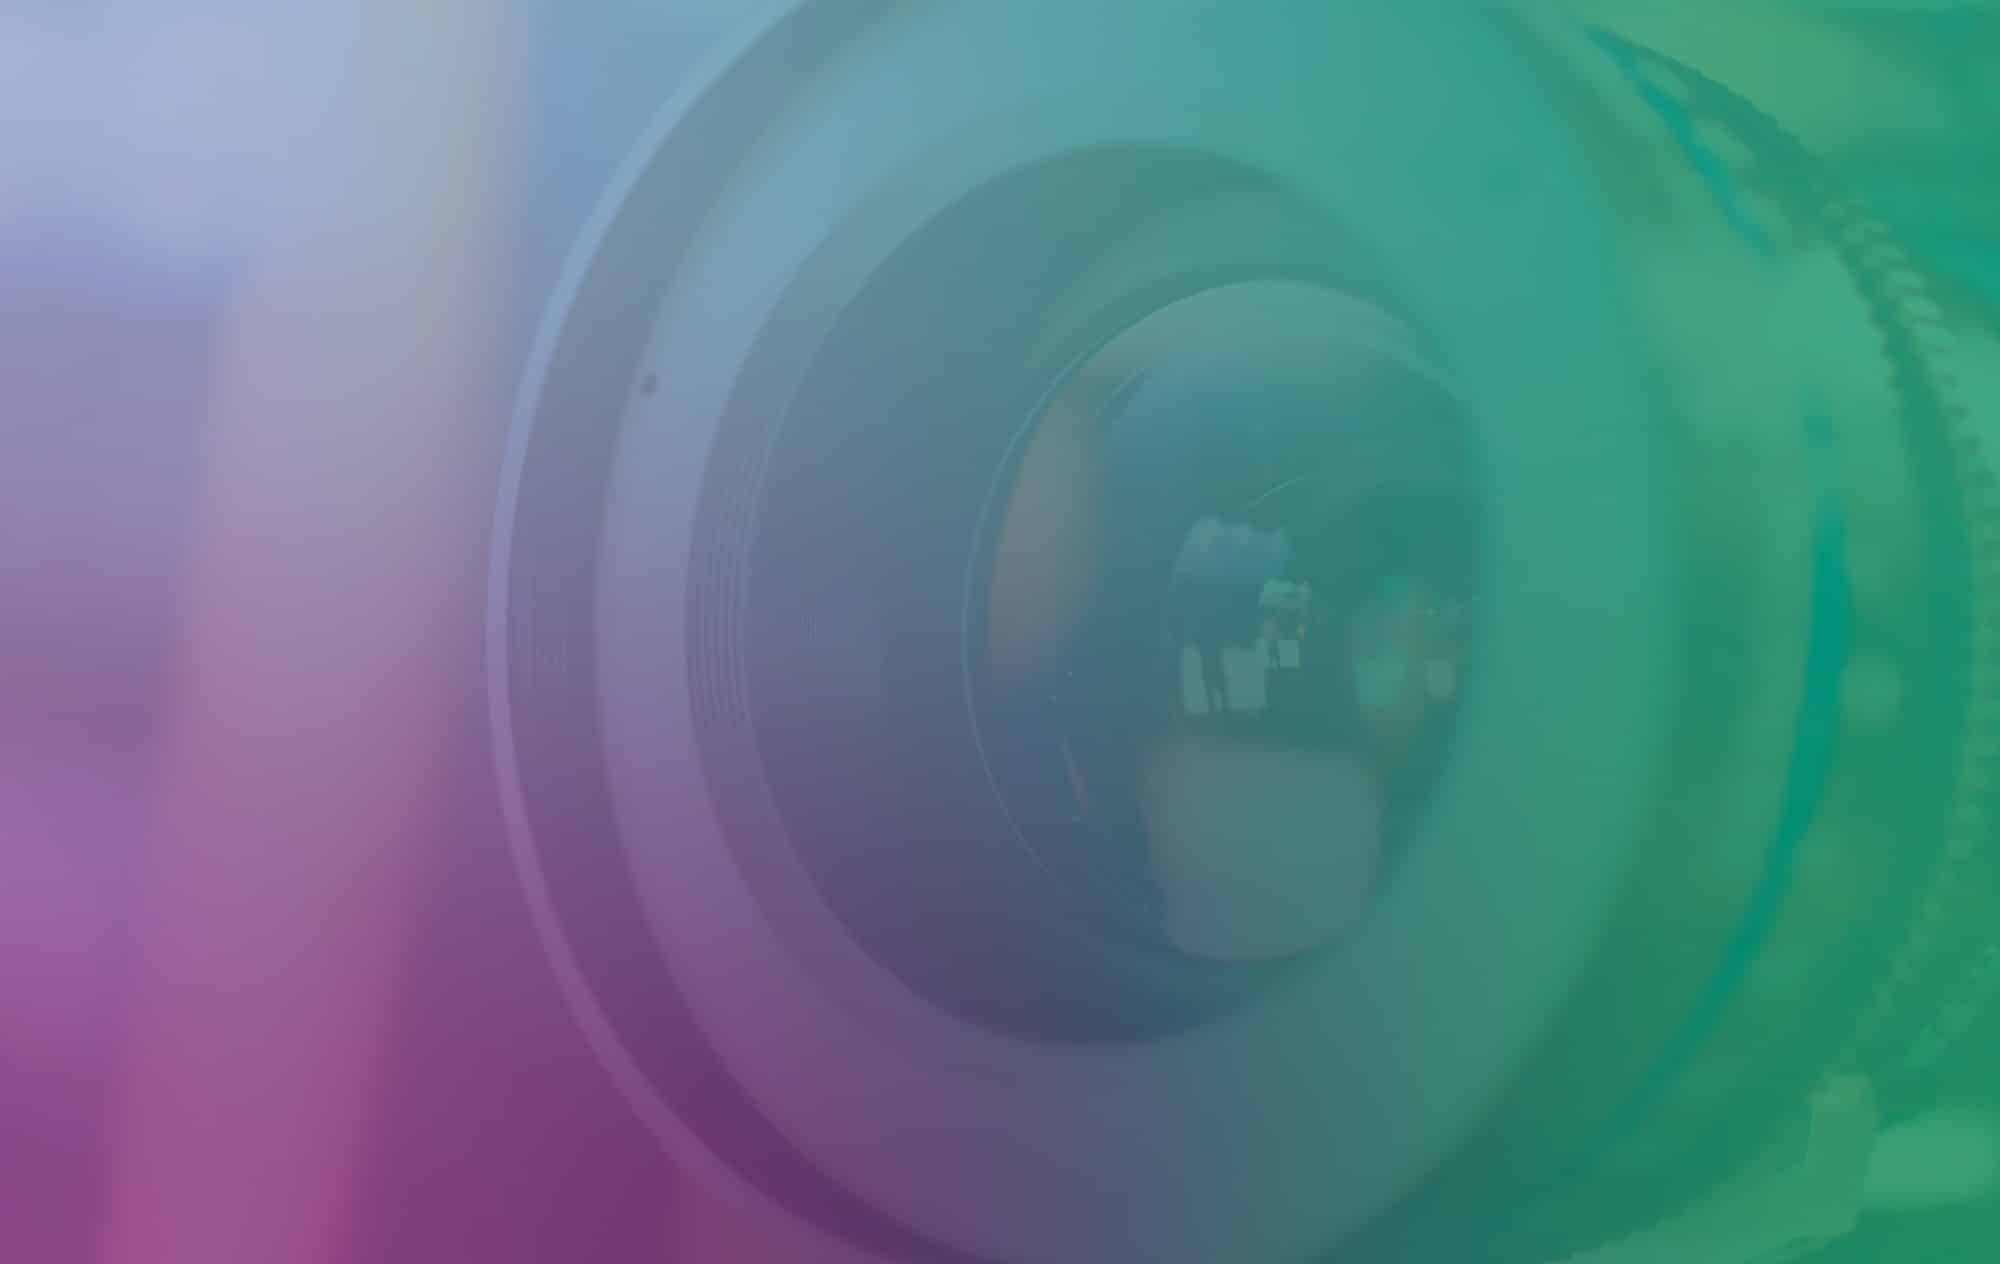 Image of camera lense underneath purple and green gradients